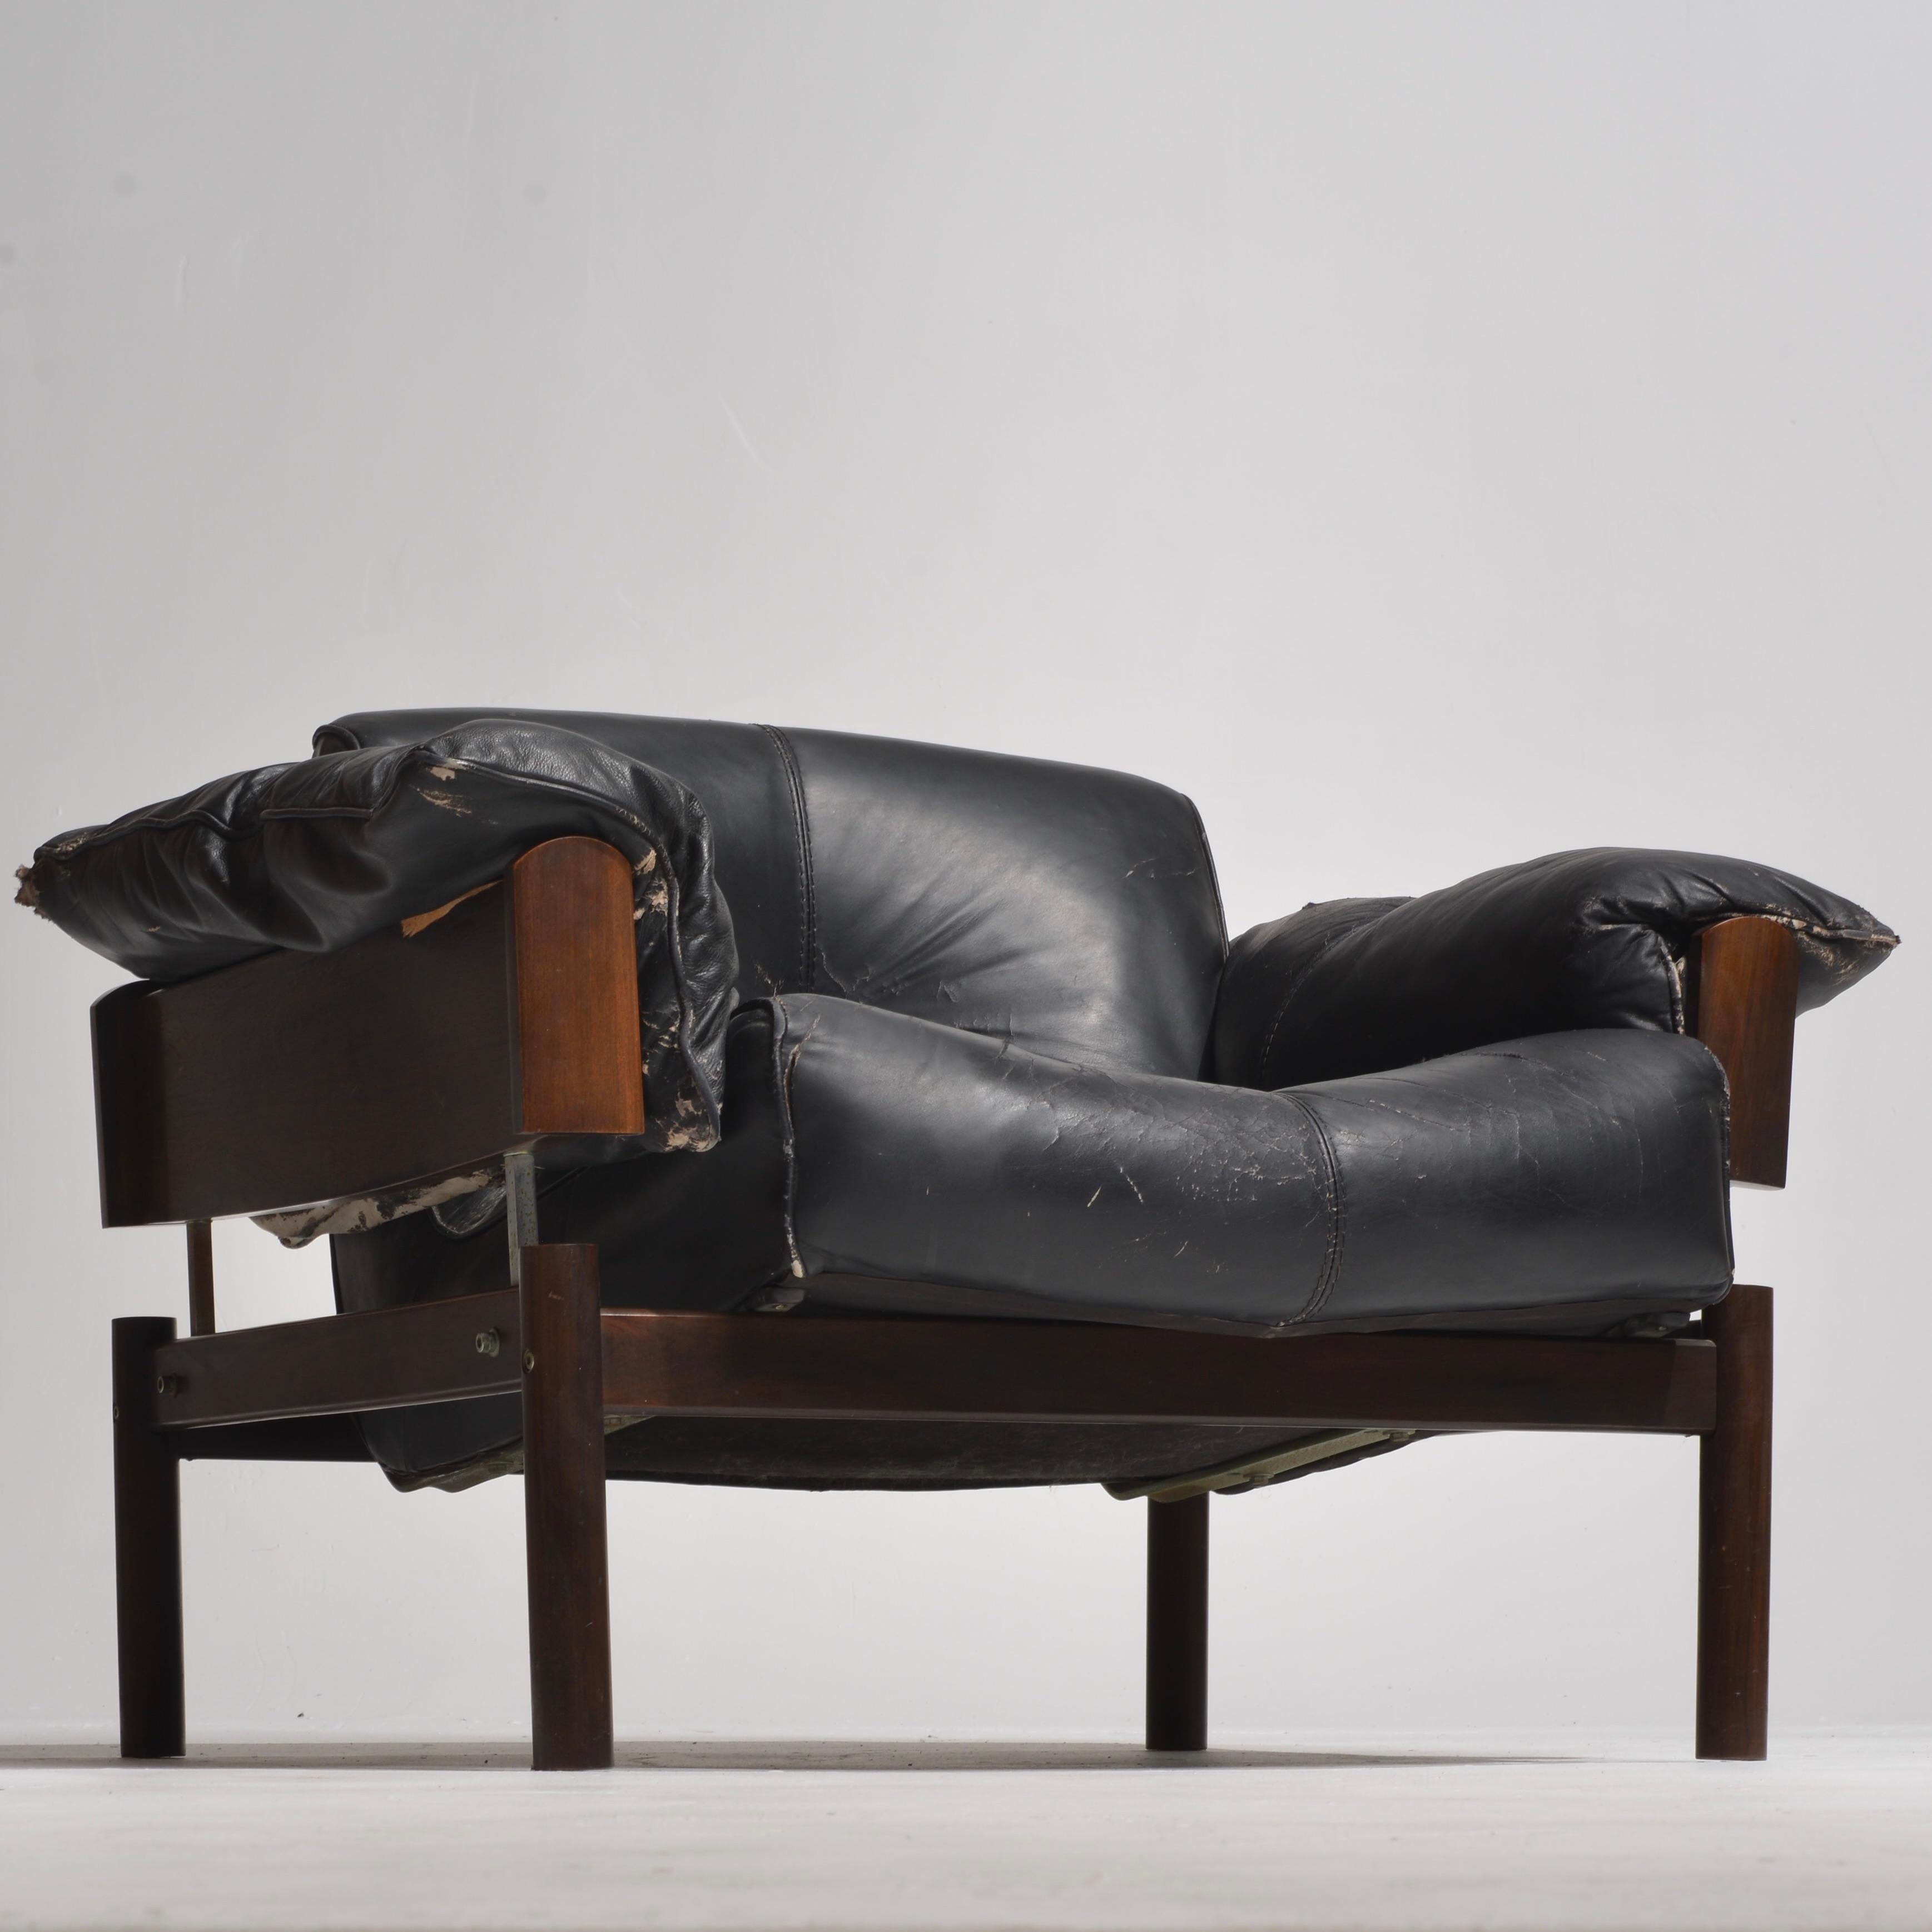 Brazilian modernist chair Model MP-103, designed by Percival Lafer in 1960. The 103 is Lafer’s first chair design. This piece features a stunning Brazilian rosewood structure with chrome supports and maintains the original leather upholstery. 

